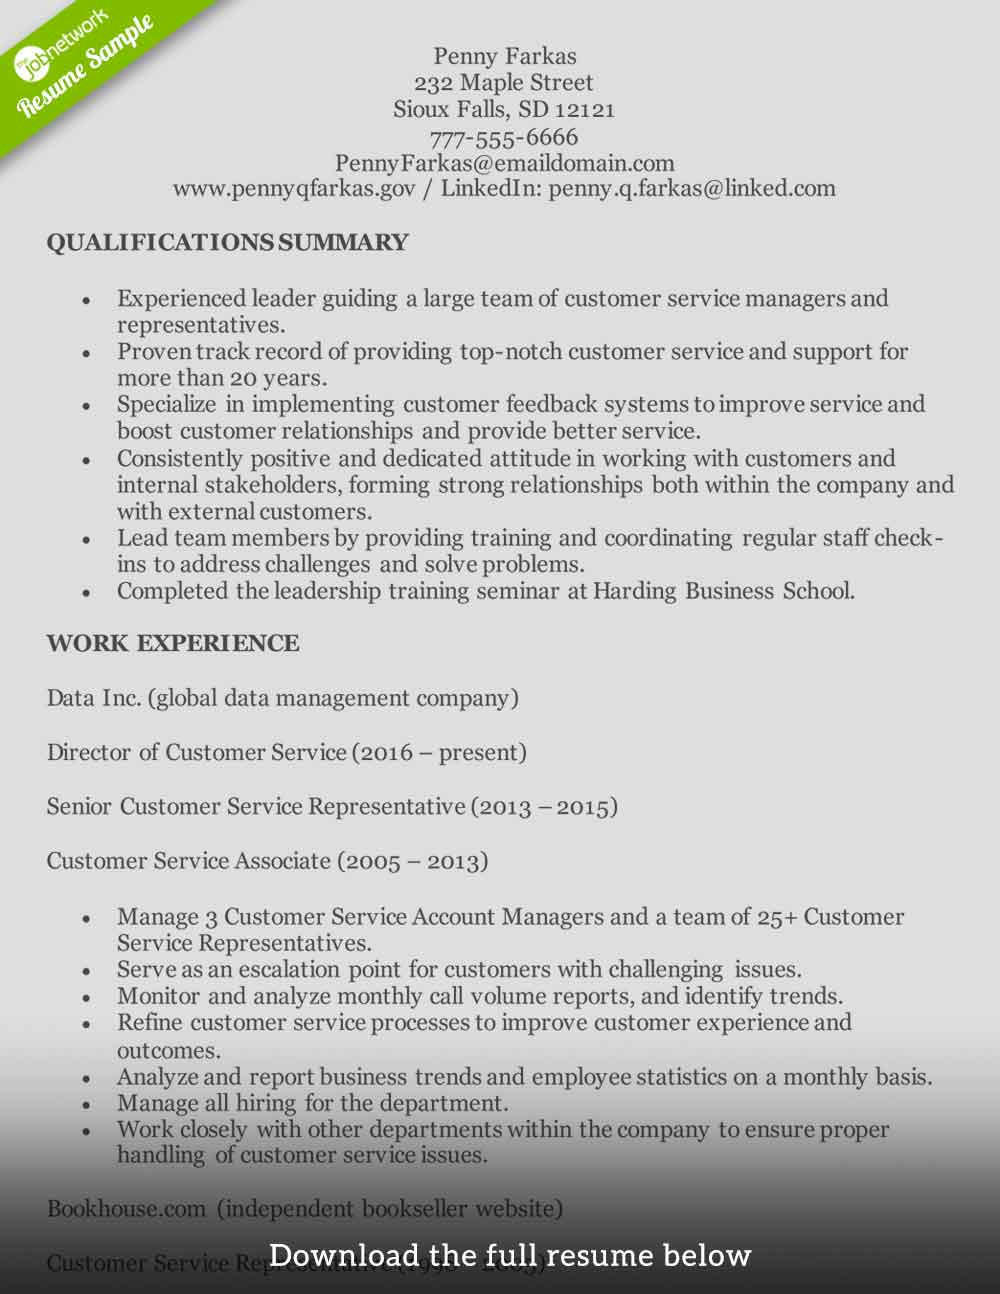 Resume Samples while In College for Customer Care Executive Customer Service Resume -how to Write the Perfect One (examples)